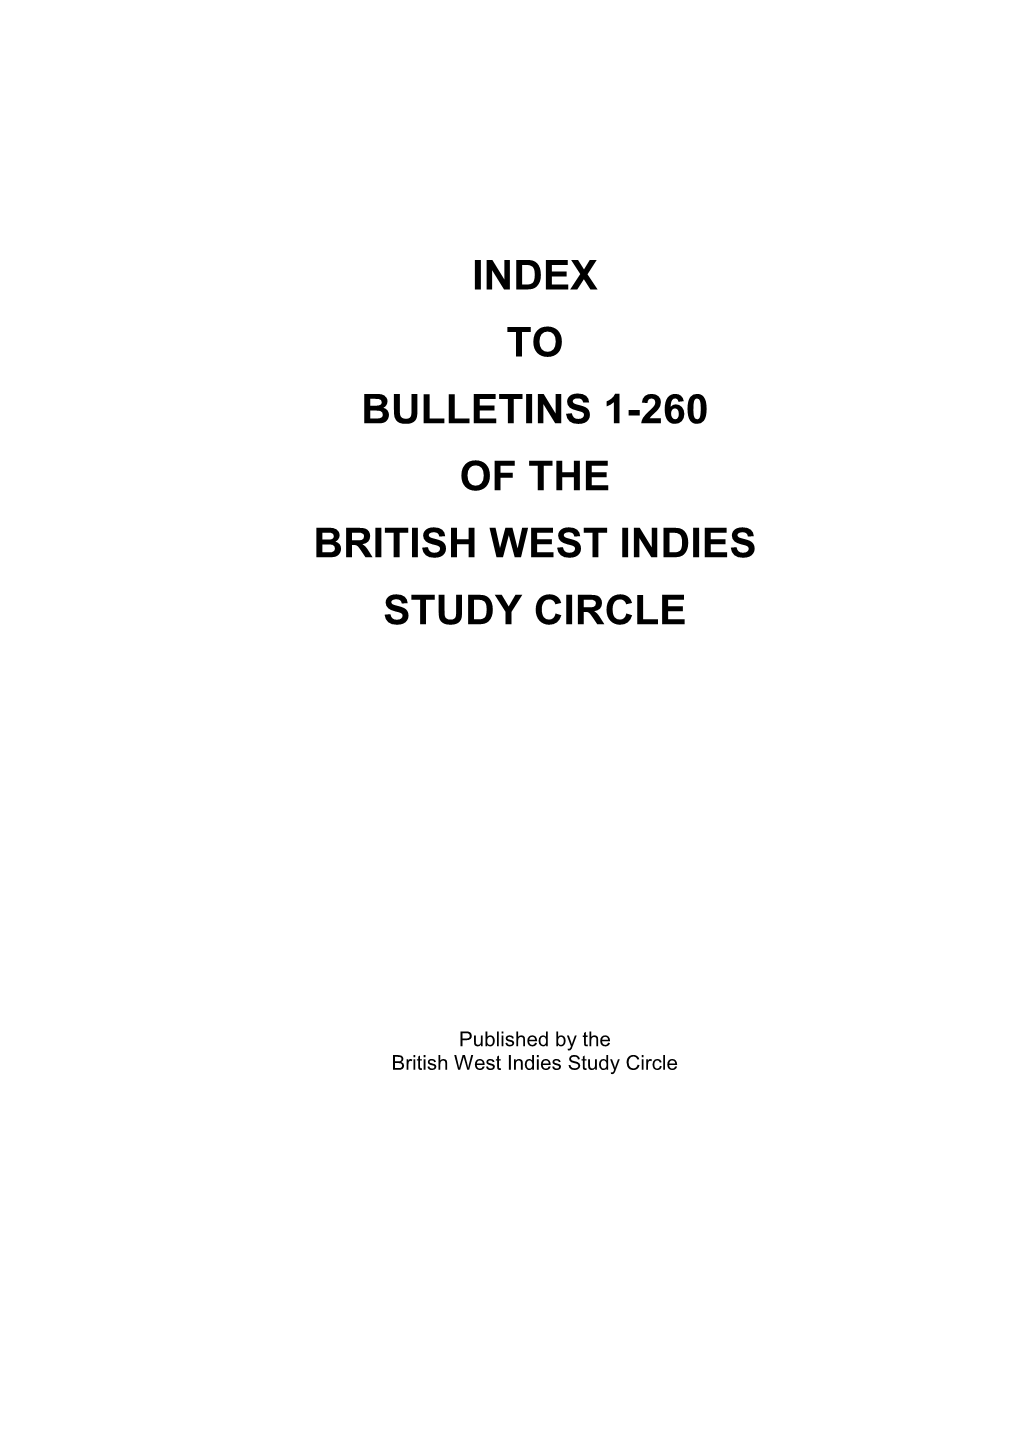 Index to Bulletins 1-260 of the British West Indies